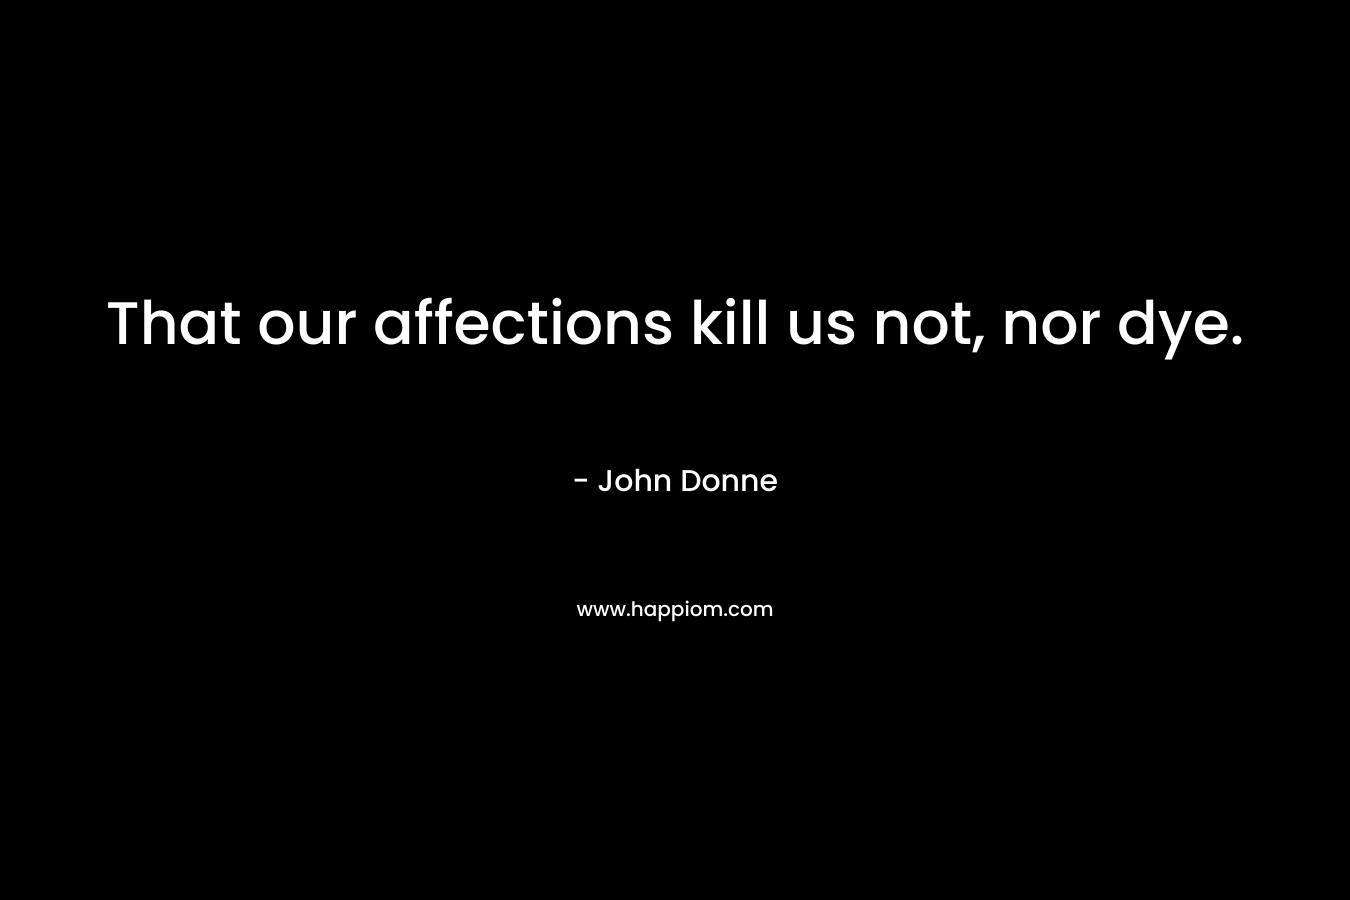 That our affections kill us not, nor dye.